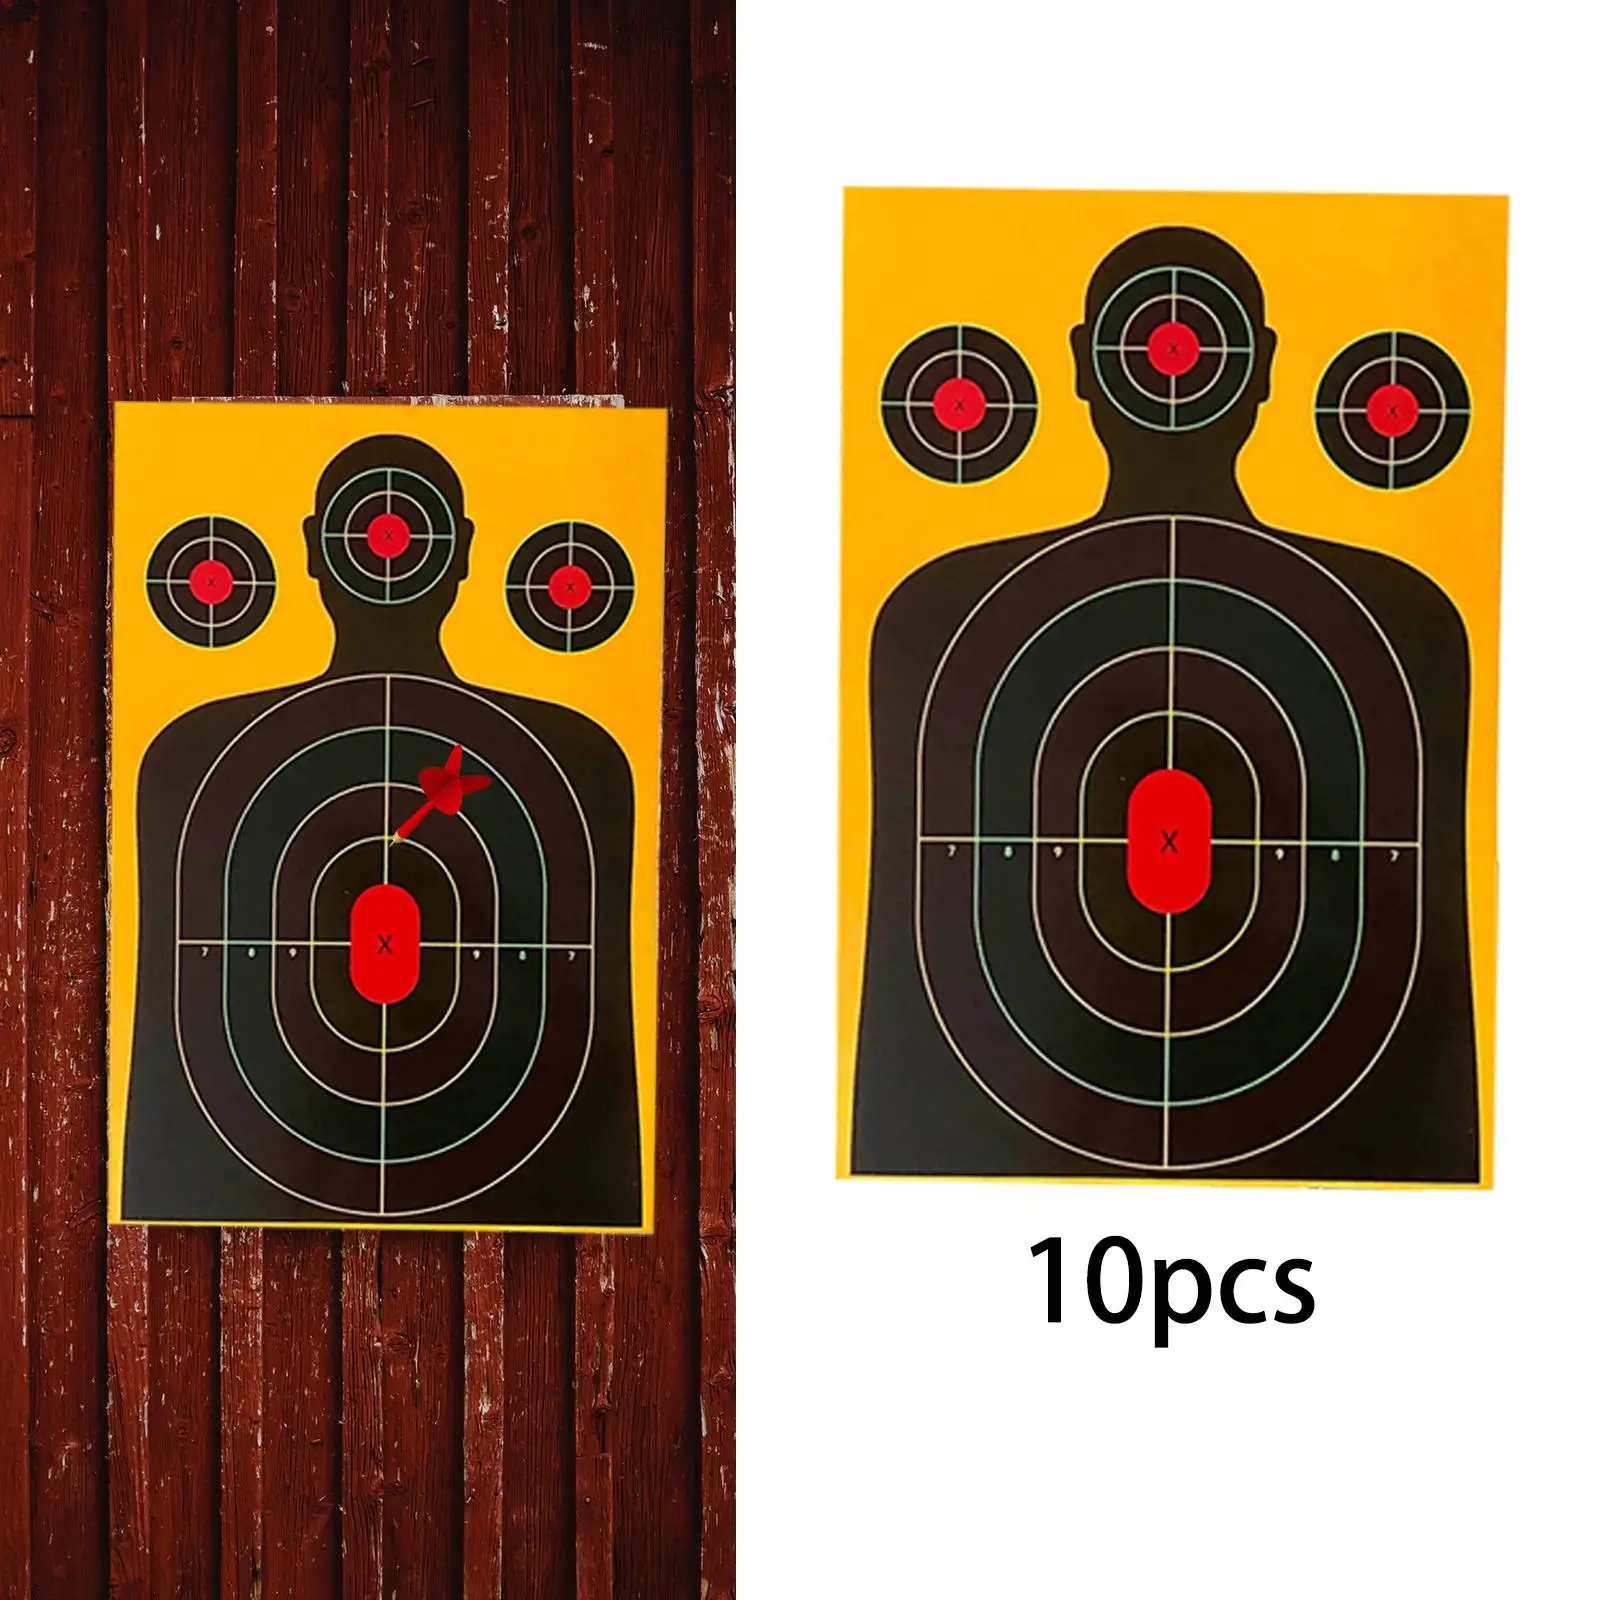 10Pcs Silhouette Target Wargame Durable without Stand Portable Outdoor Activities Target Paper Hunting Silhouette Target Target